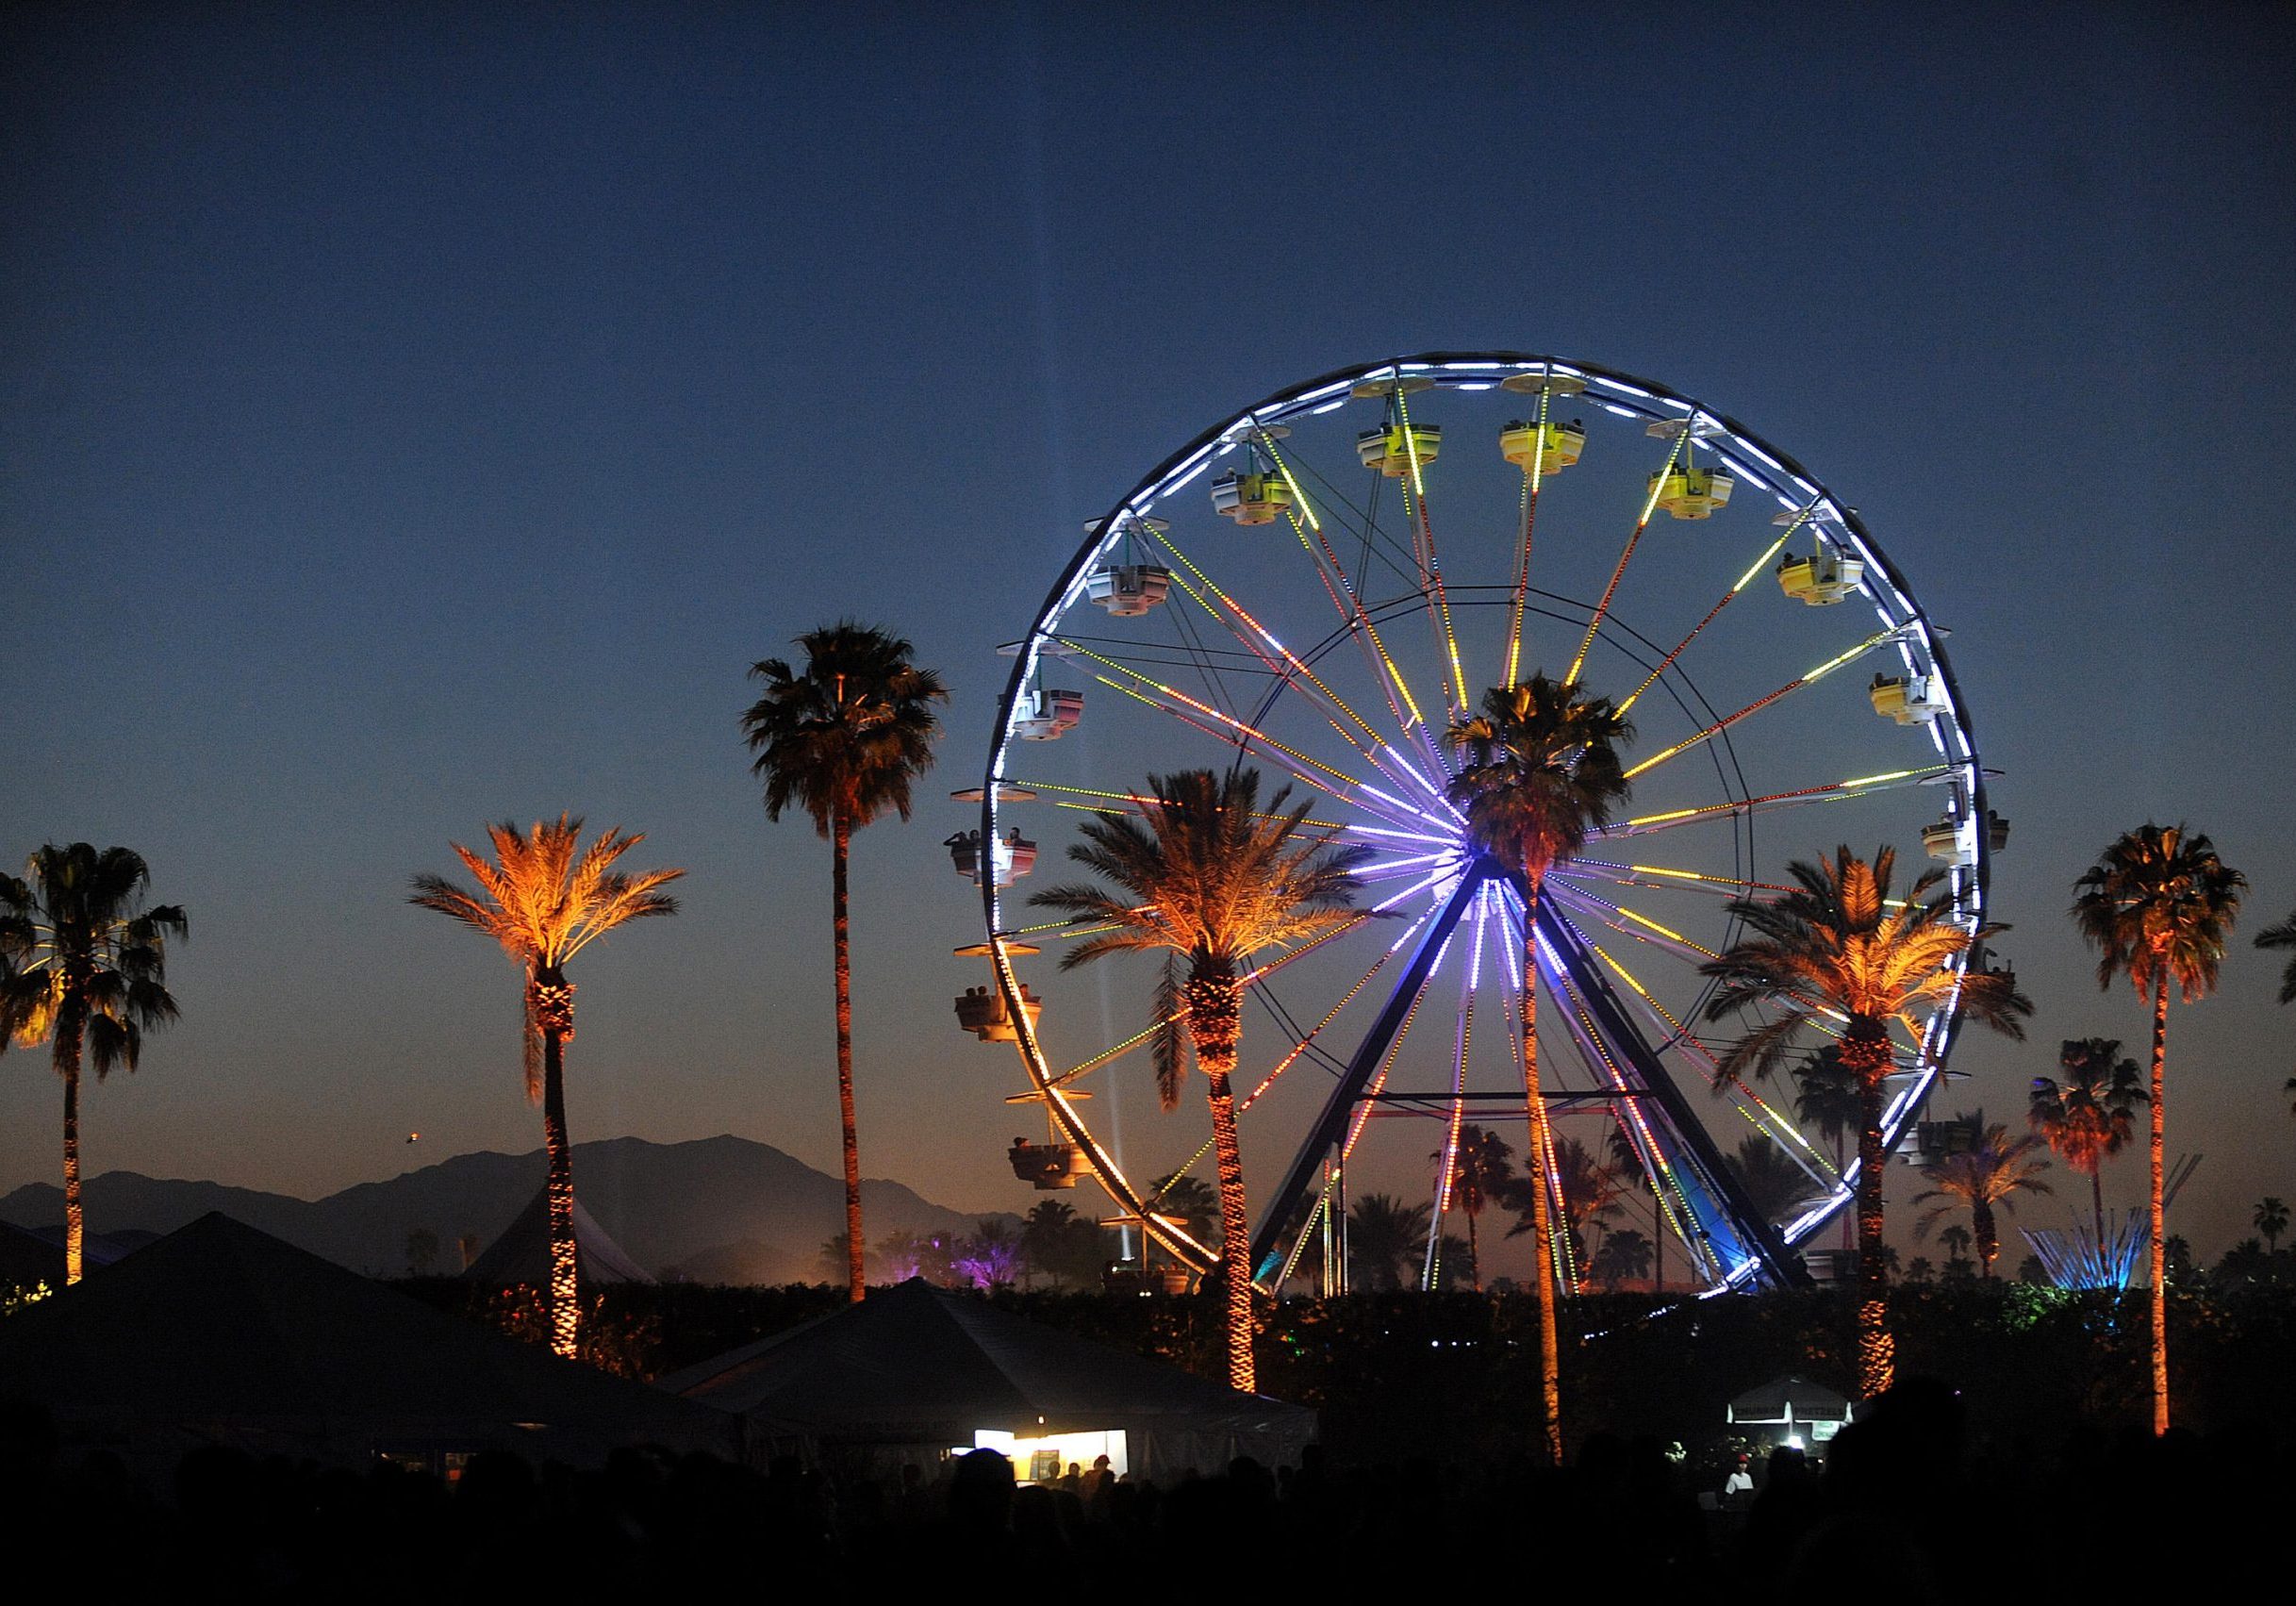 CDMW9B Apr 15, 2011 - Indio, California; USA - General Atmosphere with ferris wheel at the 2011 Coachella Music &amp; Arts Festival that is taking place at the Empire Polo Field.  The three day festival will attract thousands of fans to see a variety of artist on six different stages.  Copyright 2011 Jason Moo